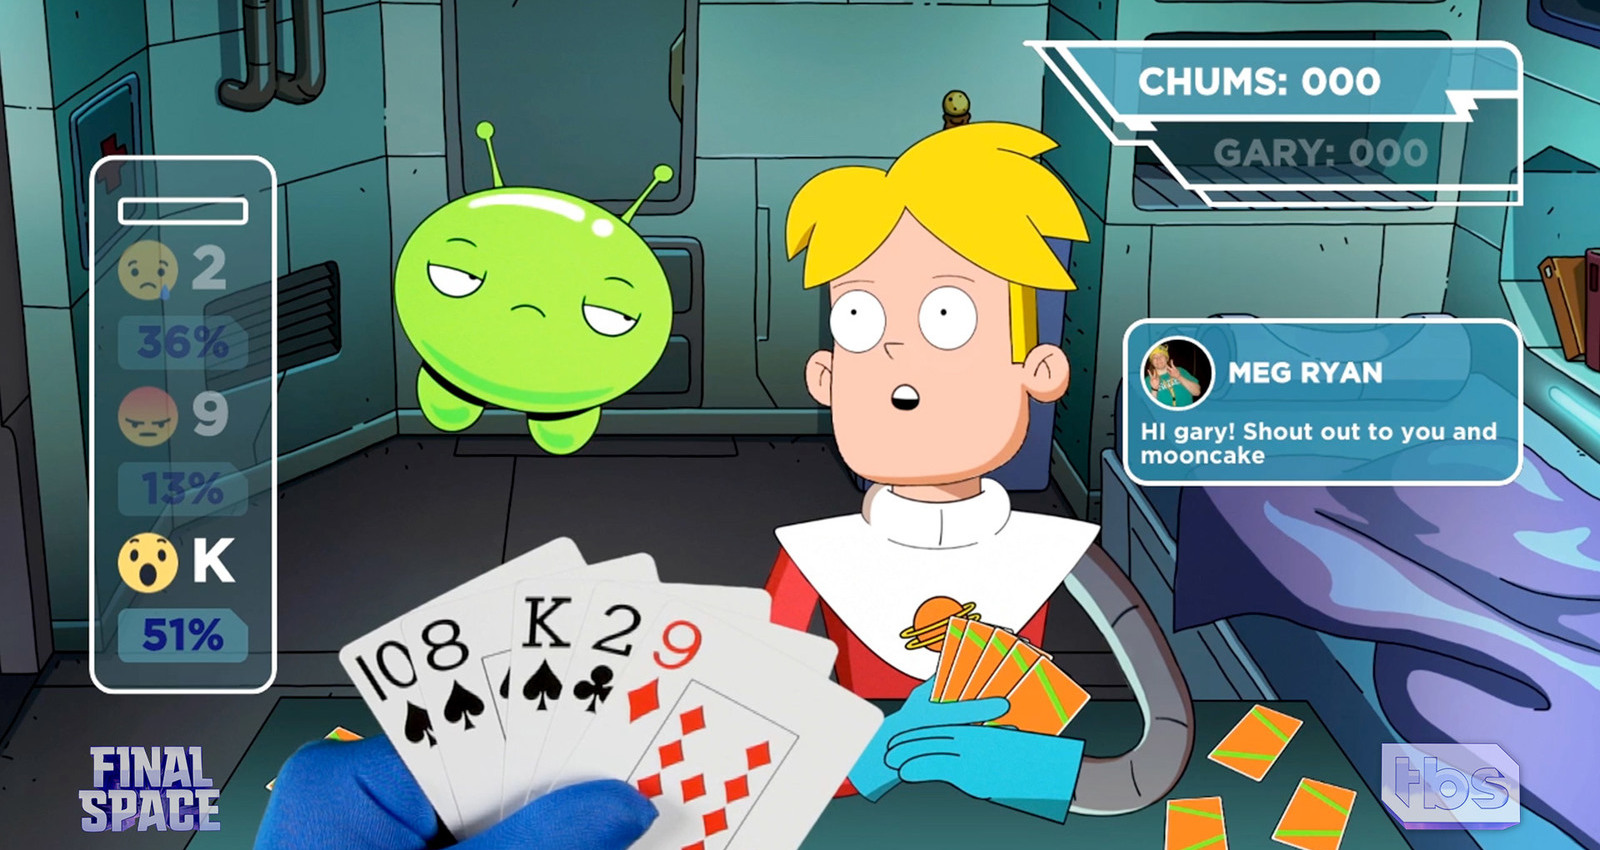 Final Space - Facebook Live: Cards With Gary